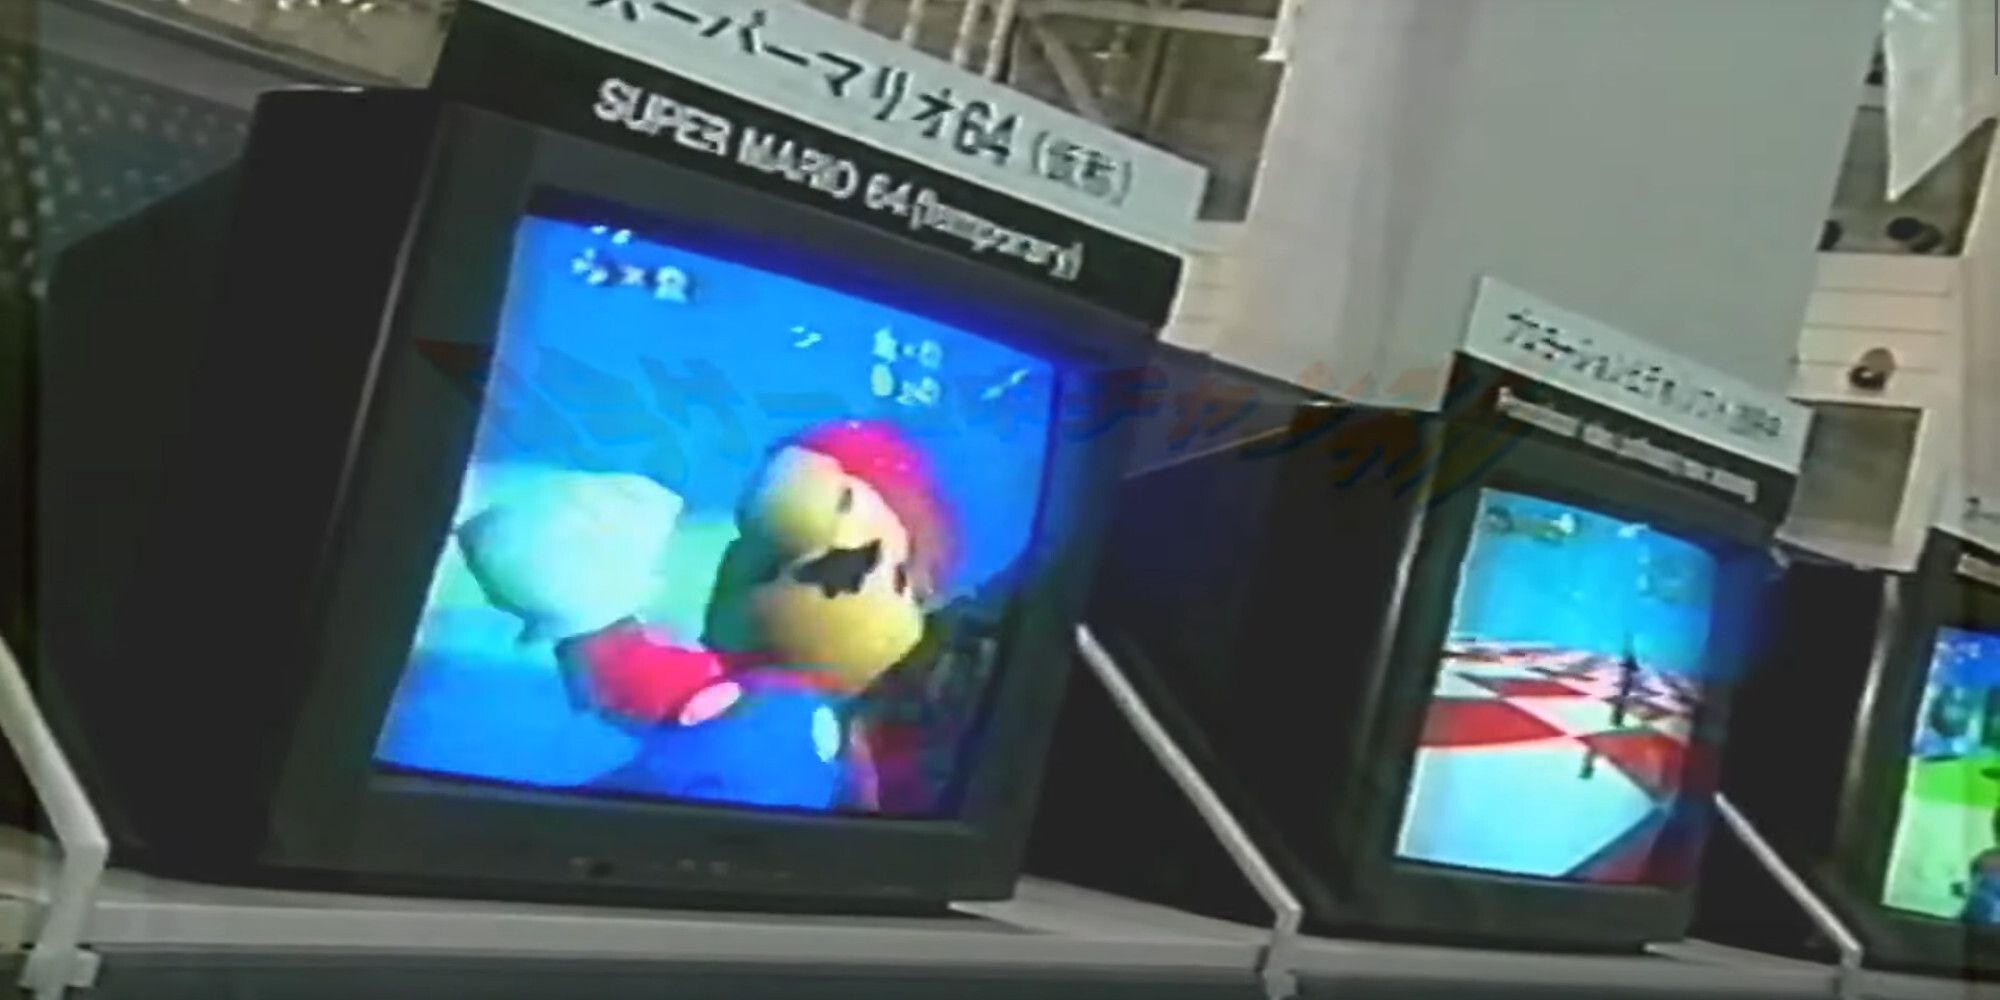 Two TVs with Super MArio 64 footage playing on them, one with Mario and one with Luigi